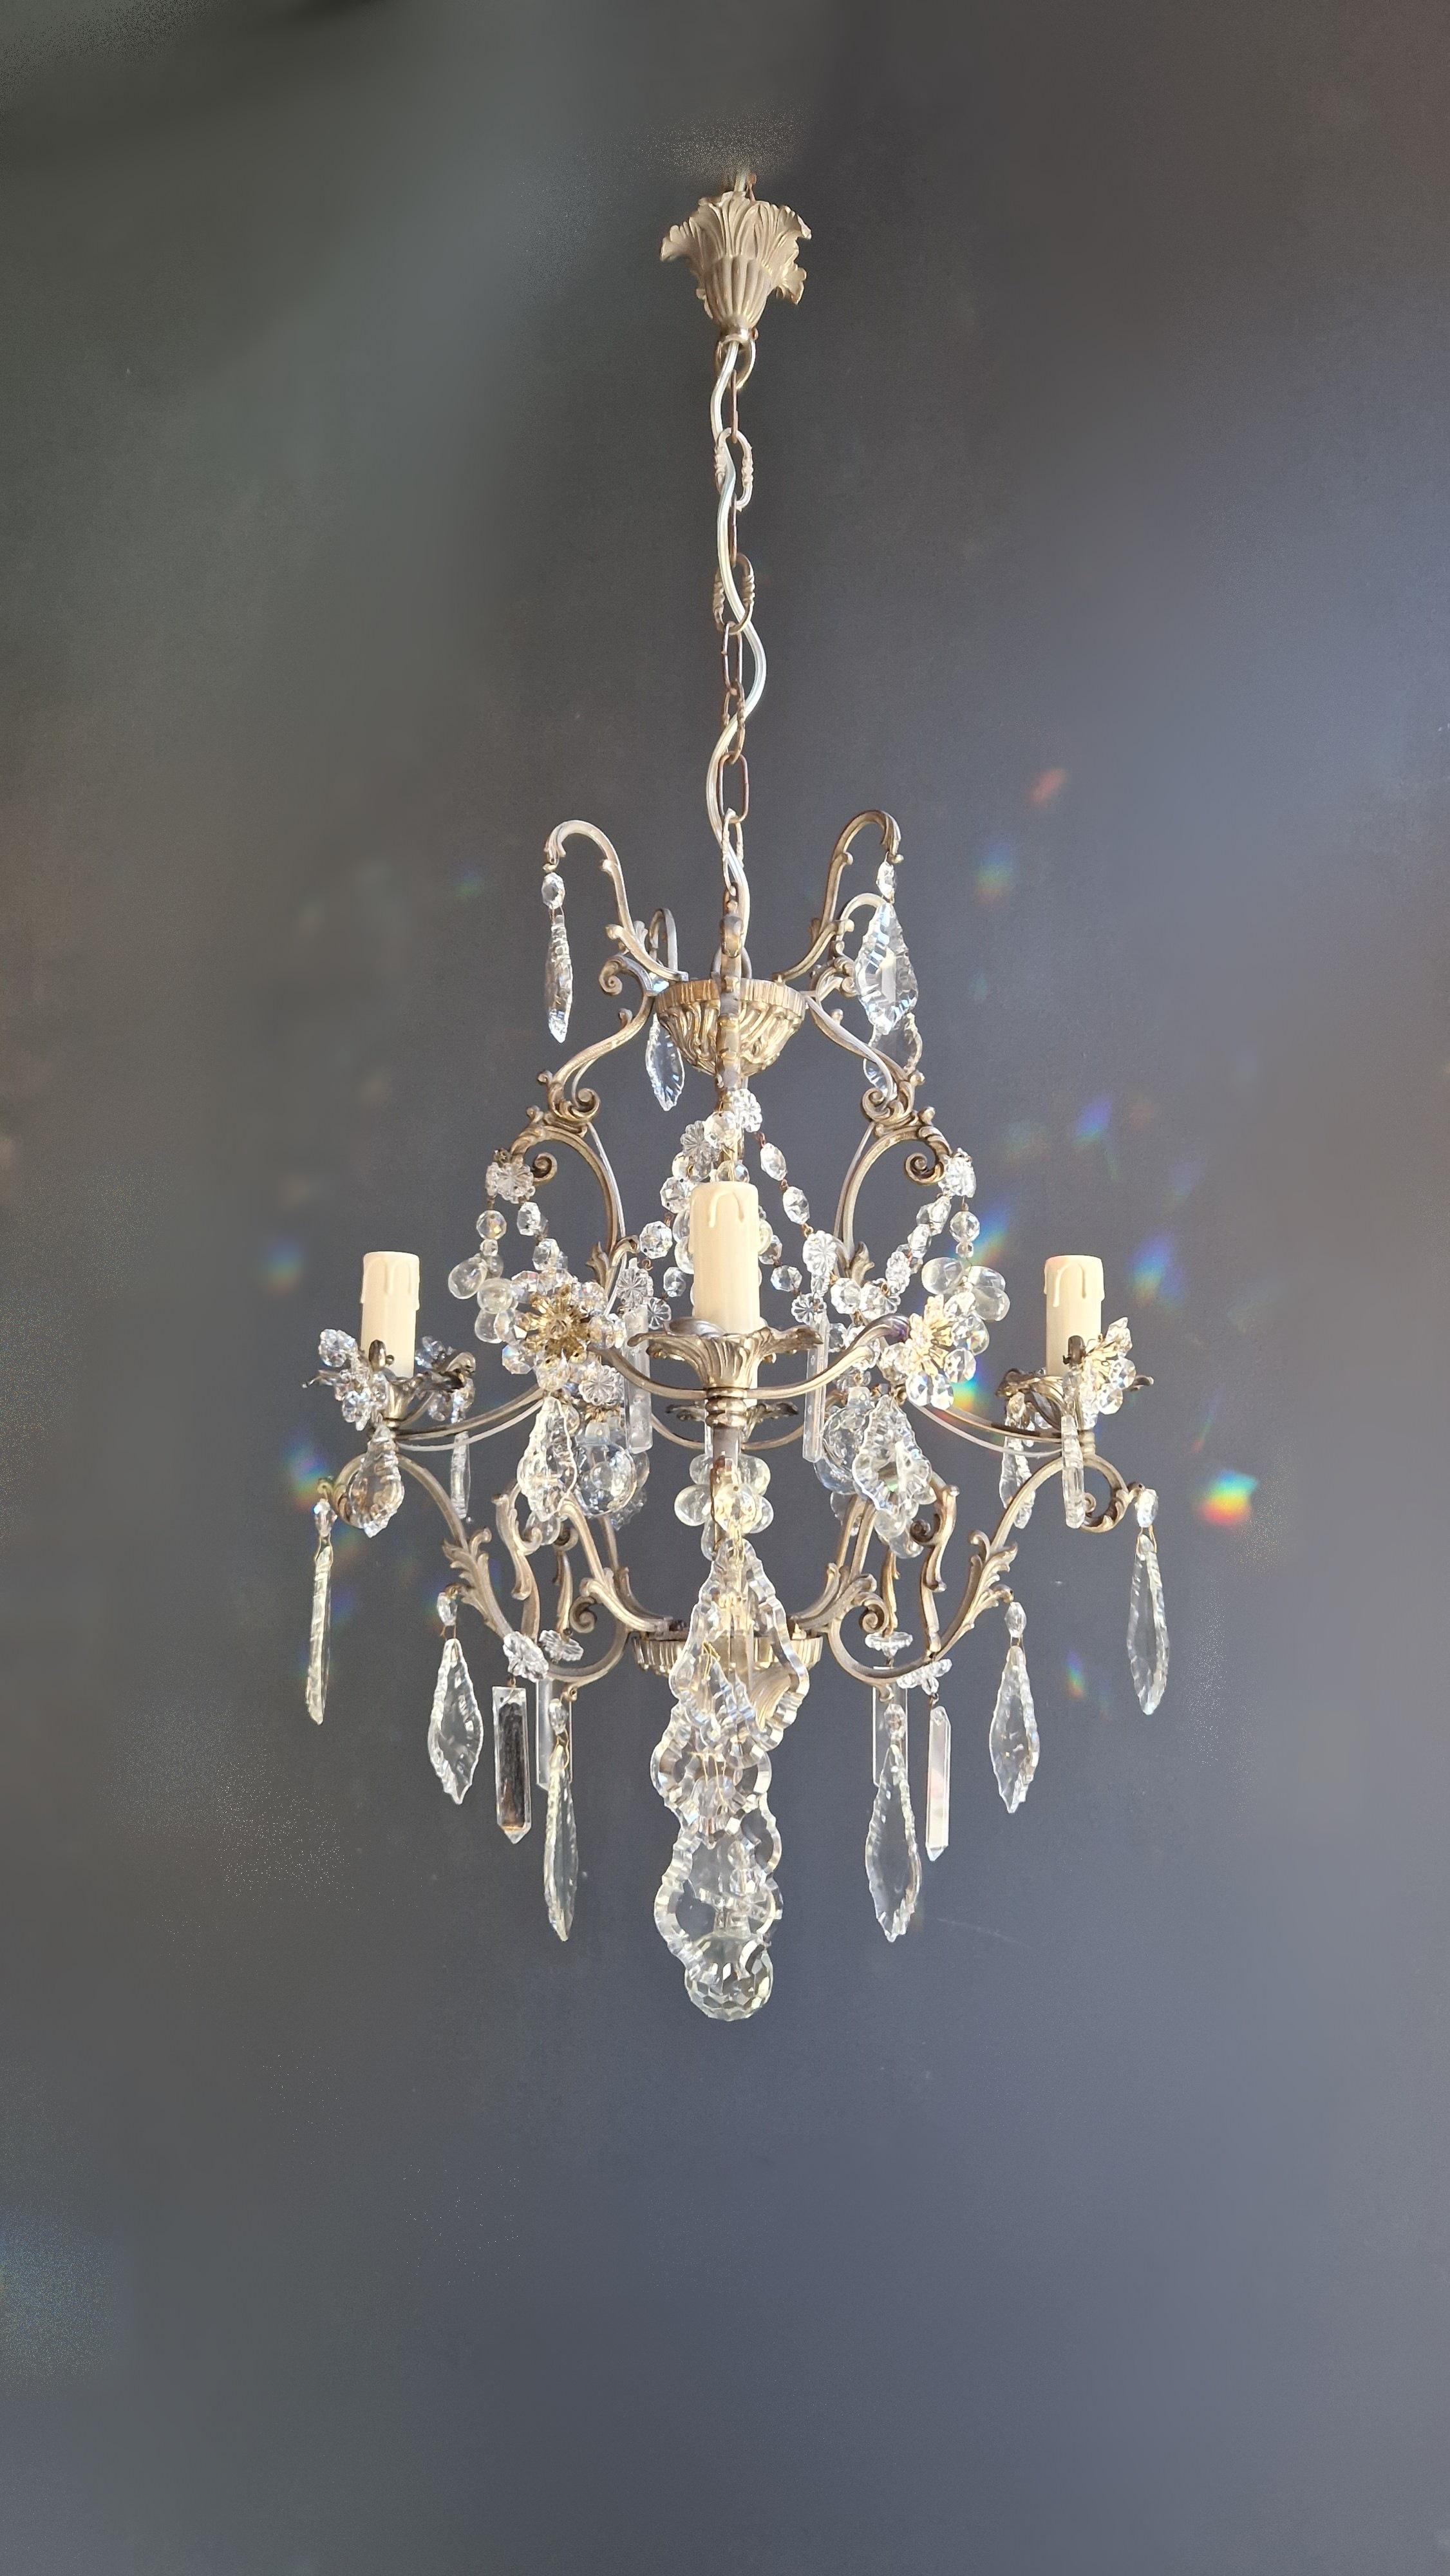 Original preserved chandelier, circa 1940. Cabling and sockets completely renewed. Crystal hand knotted
Measures: Total height: 85 cm, height without chain: 60 cm, diameter 40 cm, weight (approximately) 5 kg.

Number of lights: 4-light bulb